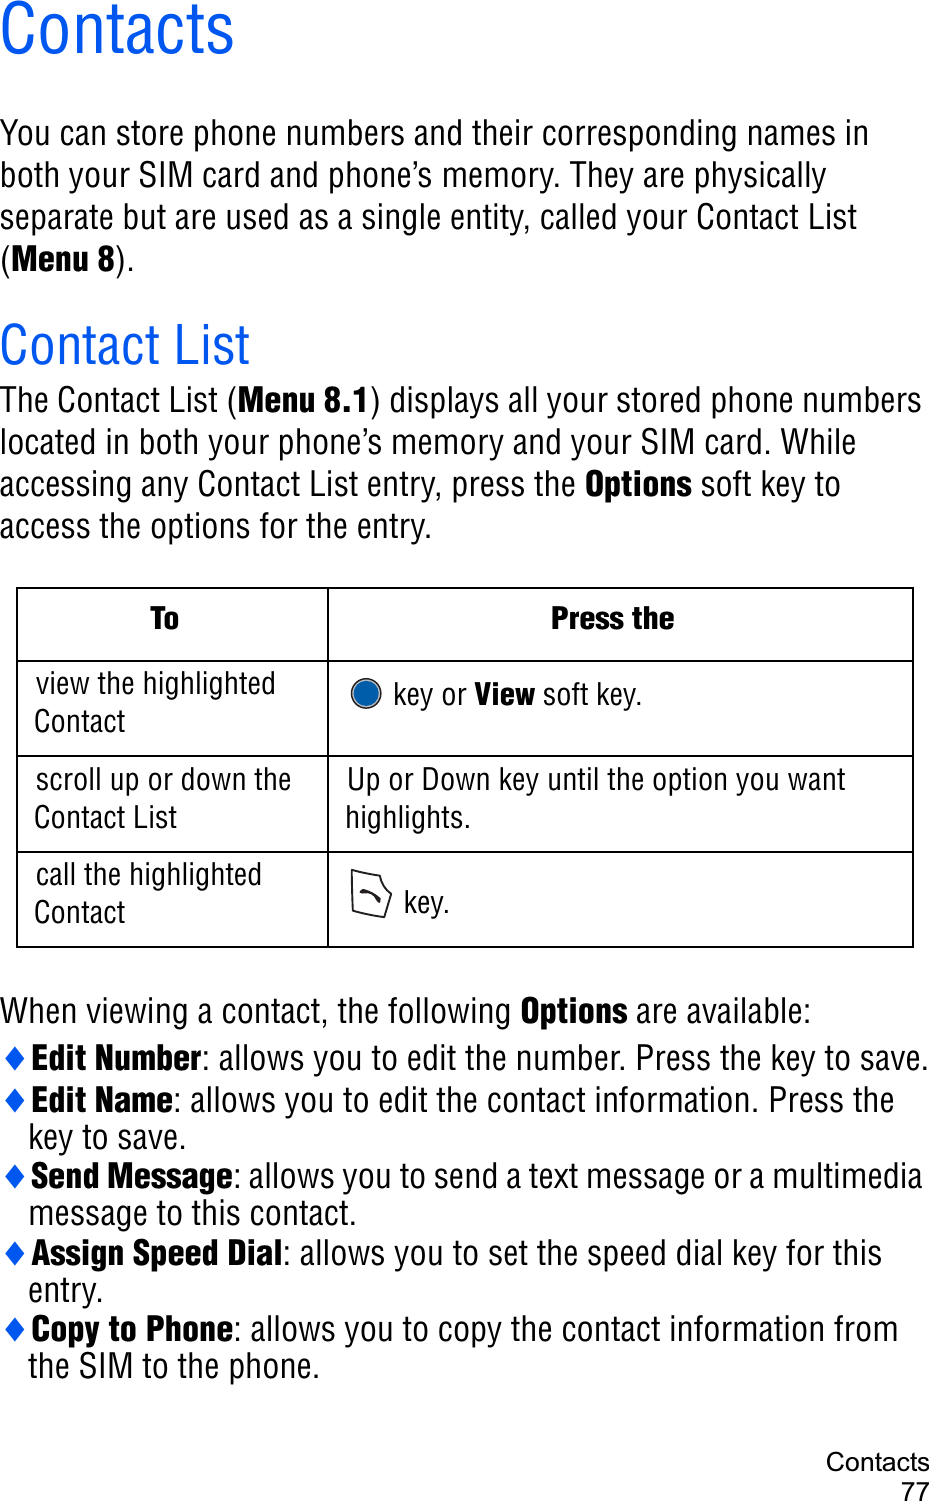 Contacts77ContactsYou can store phone numbers and their corresponding names in both your SIM card and phone’s memory. They are physically separate but are used as a single entity, called your Contact List (Menu 8).Contact ListThe Contact List (Menu 8.1) displays all your stored phone numbers located in both your phone’s memory and your SIM card. While accessing any Contact List entry, press the Options soft key to access the options for the entry.When viewing a contact, the following Options are available:iEdit Number: allows you to edit the number. Press the key to save.iEdit Name: allows you to edit the contact information. Press the key to save.iSend Message: allows you to send a text message or a multimedia message to this contact.iAssign Speed Dial: allows you to set the speed dial key for this entry.iCopy to Phone: allows you to copy the contact information from the SIM to the phone.To Press theview the highlighted Contact  key or View soft key.scroll up or down the Contact ListUp or Down key until the option you want highlights.call the highlighted Contact  key.